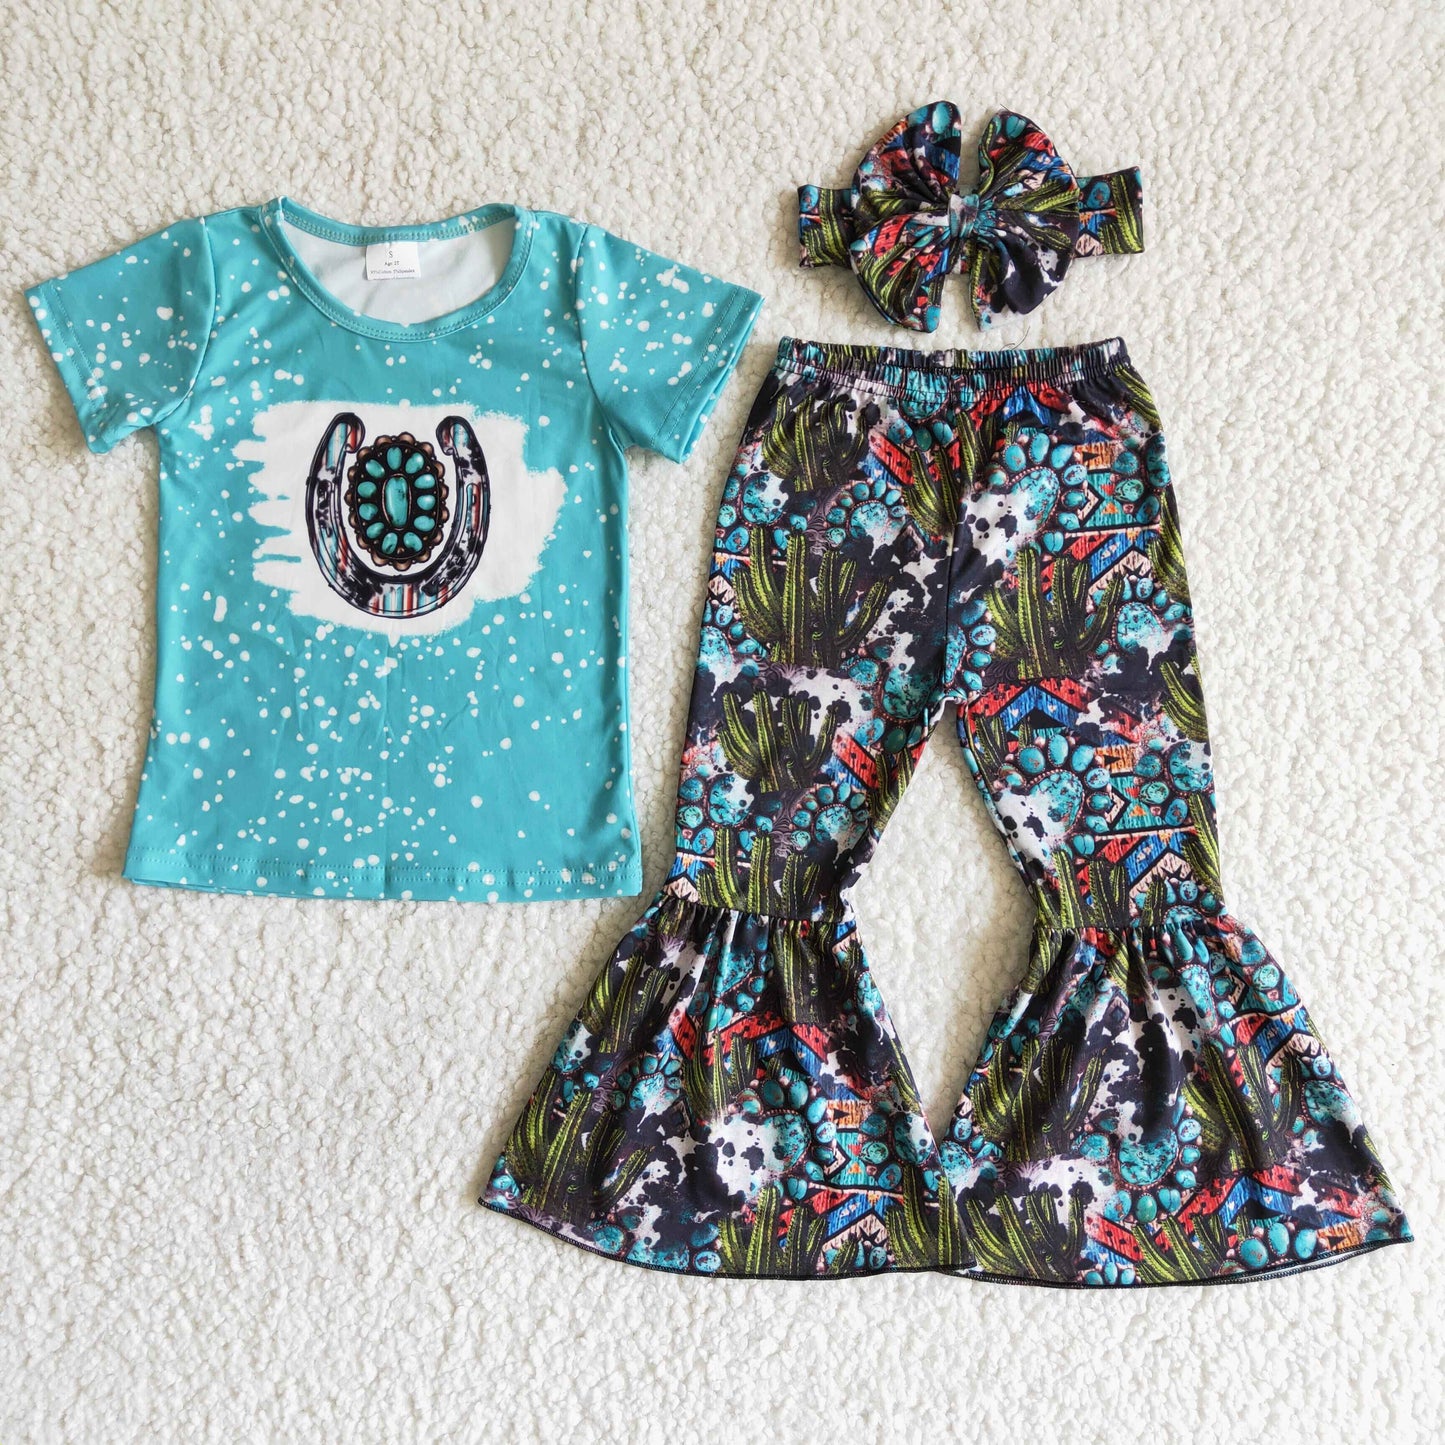 Infant girls baby girls turquoise design 2pcs bell bottom pants outfit C1-25